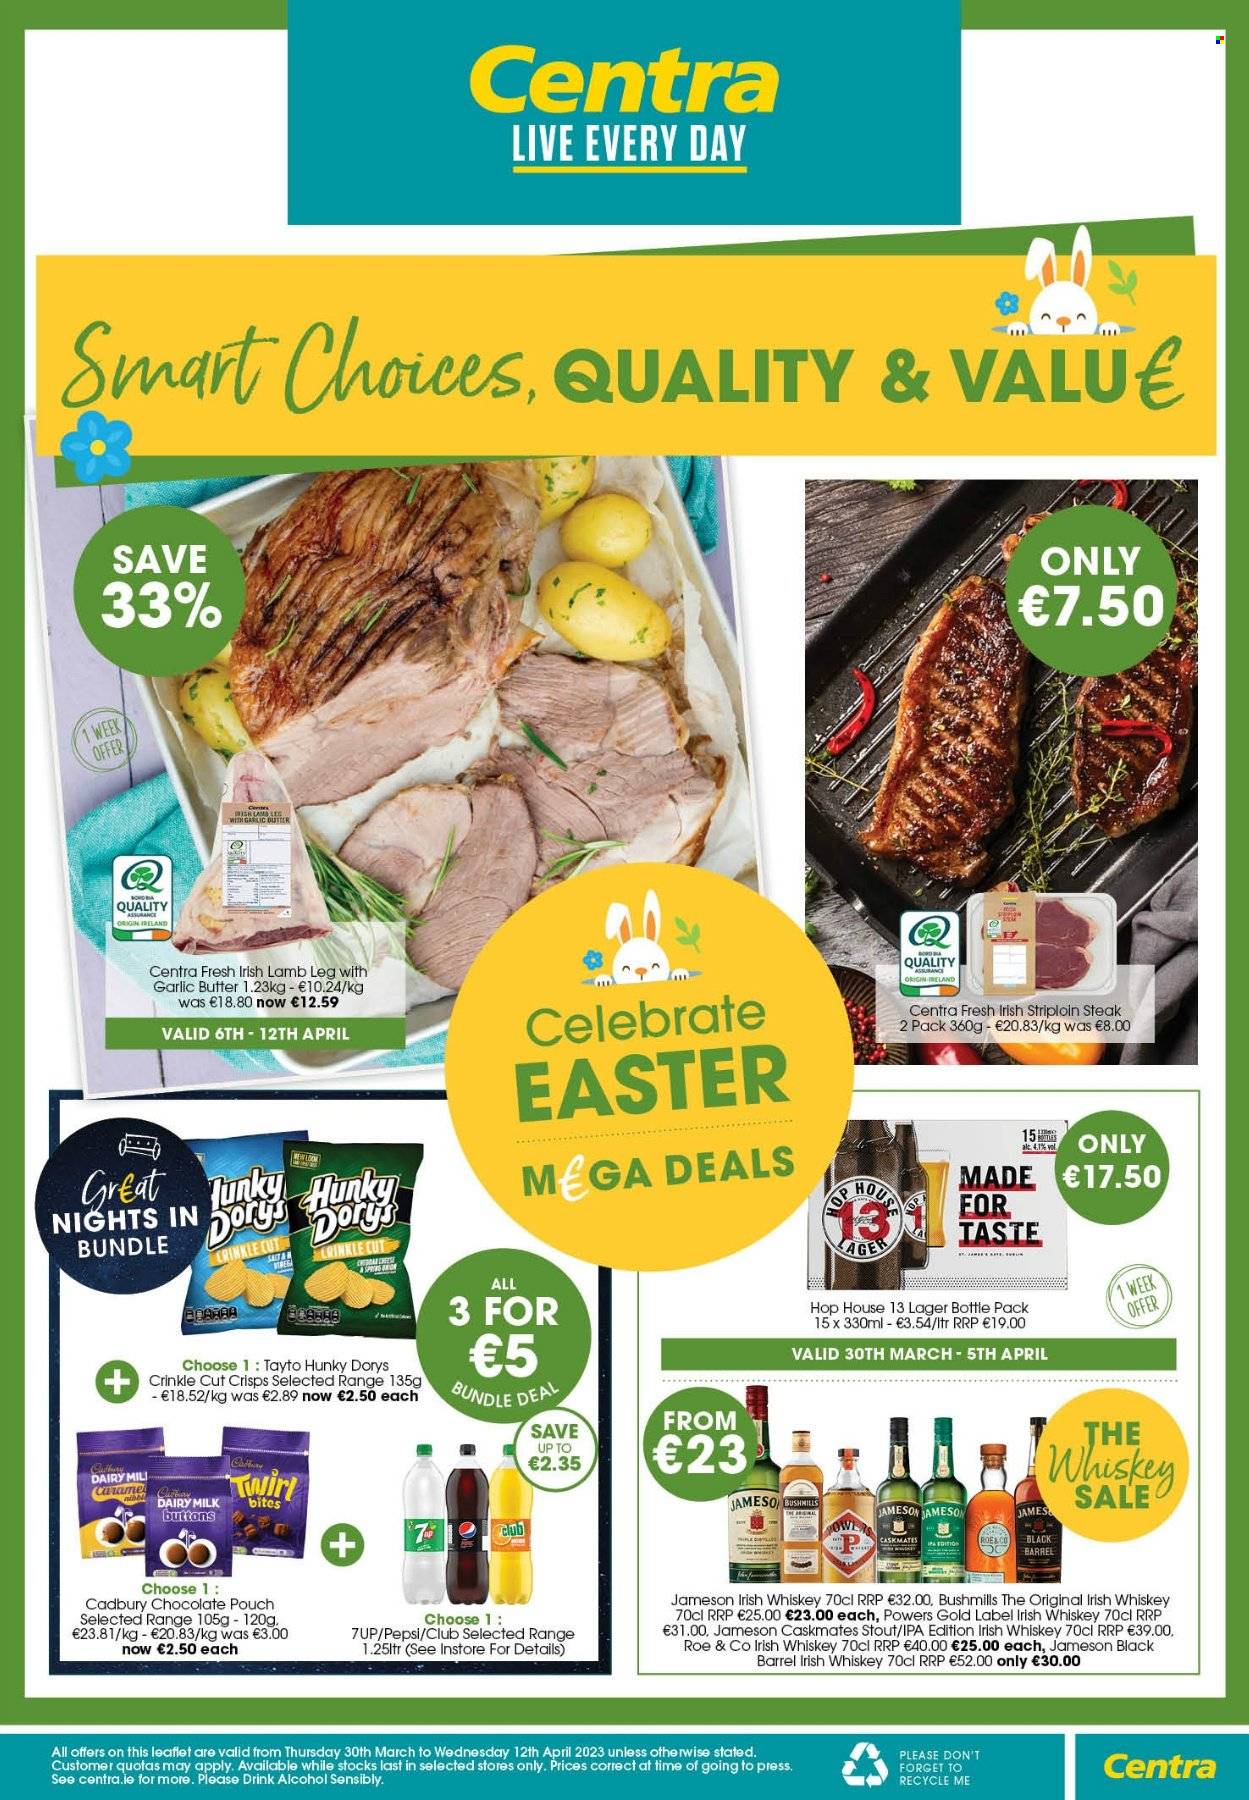 thumbnail - Centra offer  - 30.03.2023 - 12.04.2023 - Sales products - cheddar, cheese, chocolate, Cadbury, Dairy Milk, Tayto, Pepsi, 7UP, alcohol, whiskey, irish whiskey, Jameson, whisky, beer, Lager, IPA, beef meat, steak, striploin steak, lamb meat, lamb leg. Page 1.